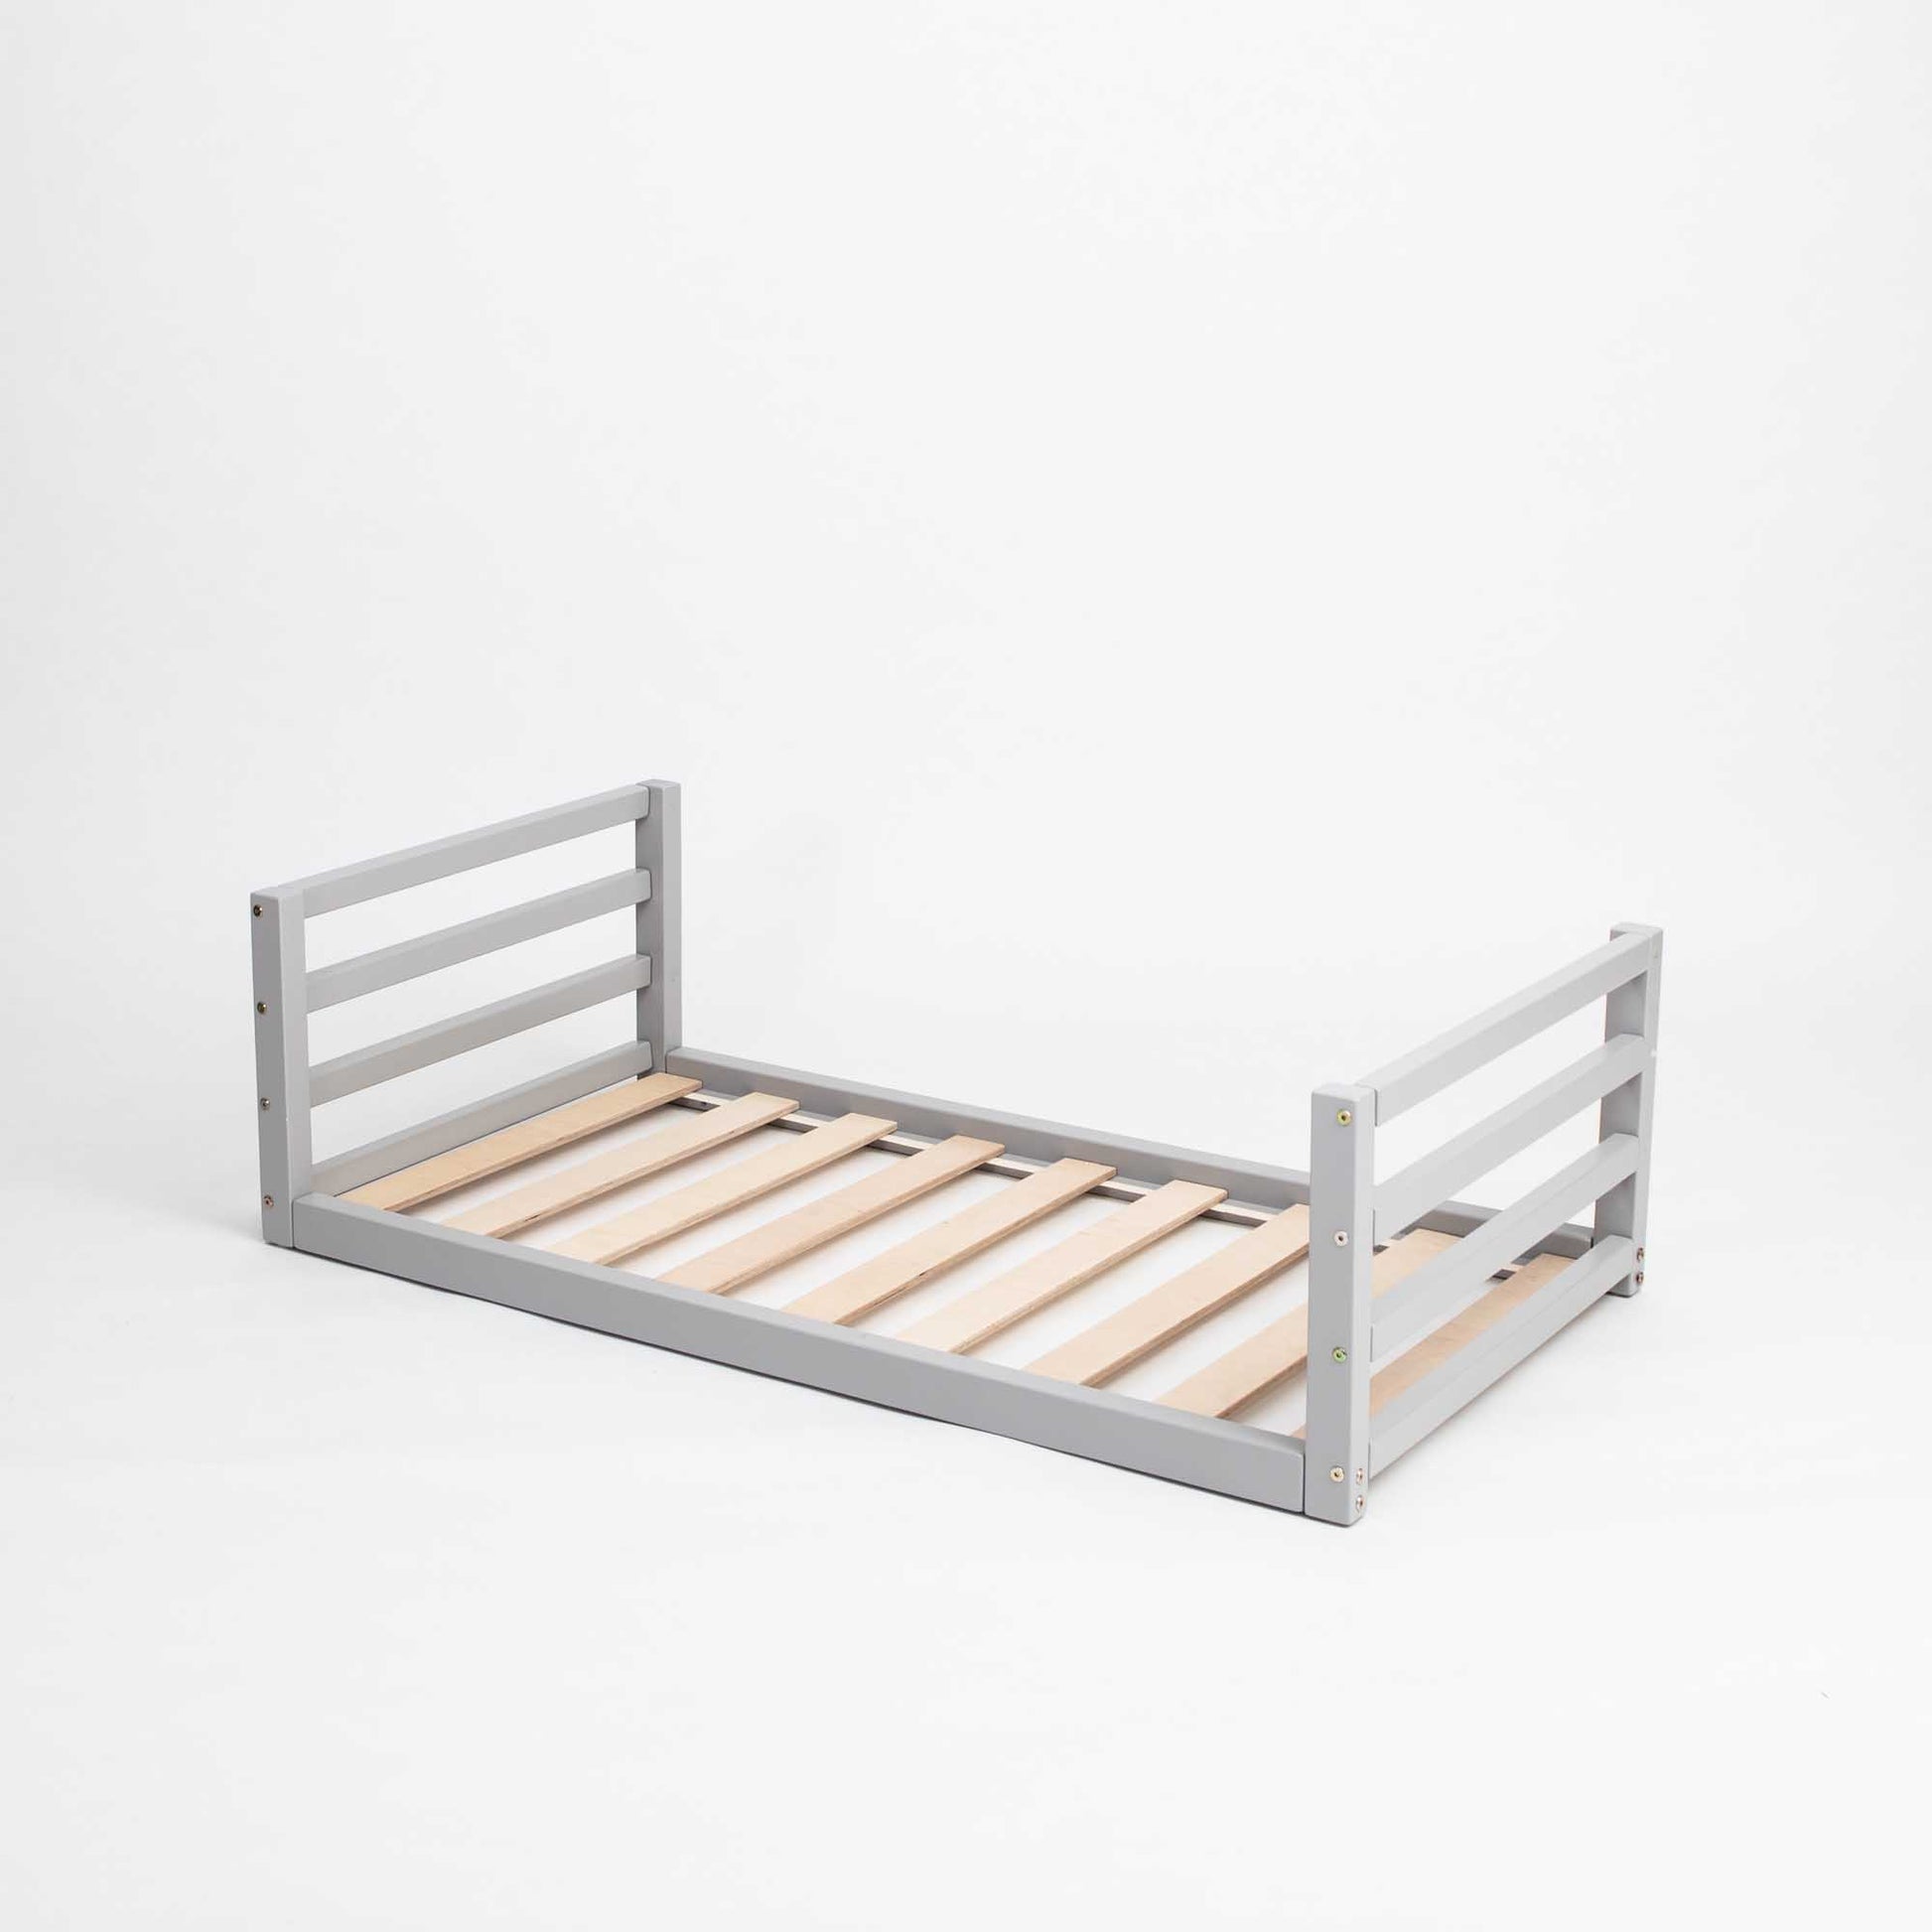 A grey Sweet Home From Wood toddler floor bed with wooden slats on a white background, made of solid pine wood.